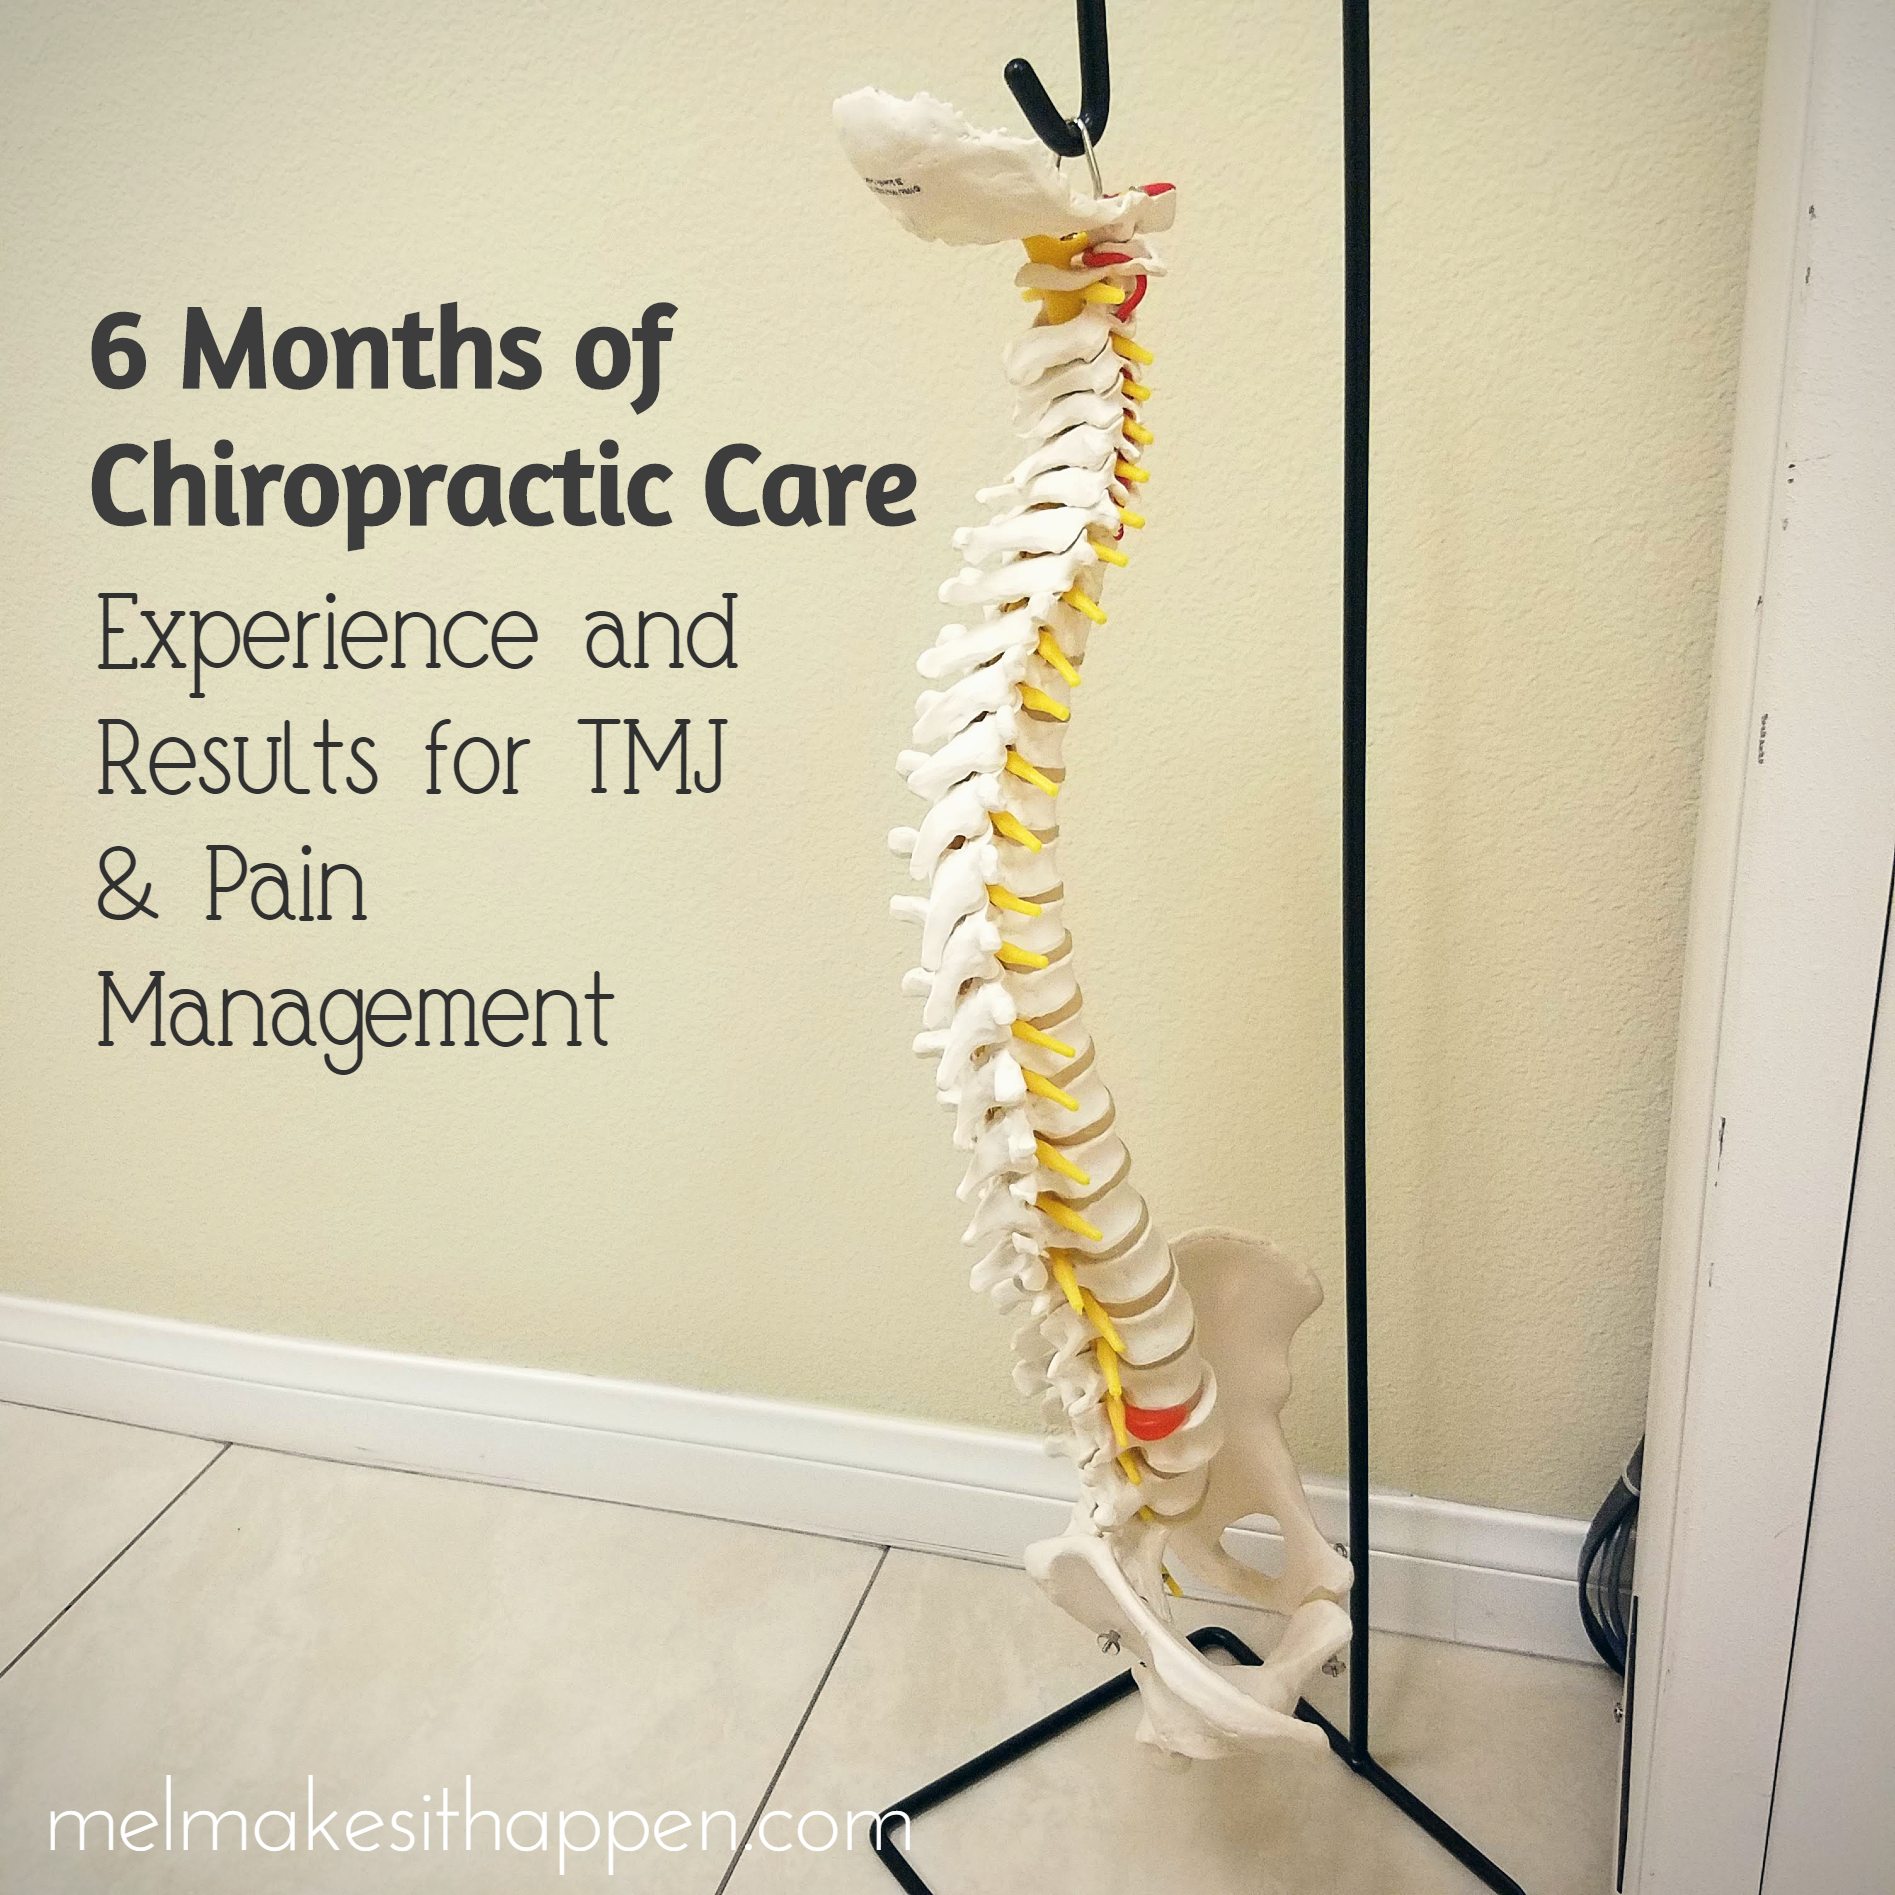 6 Months of Chiropractic Care: Experience & Results